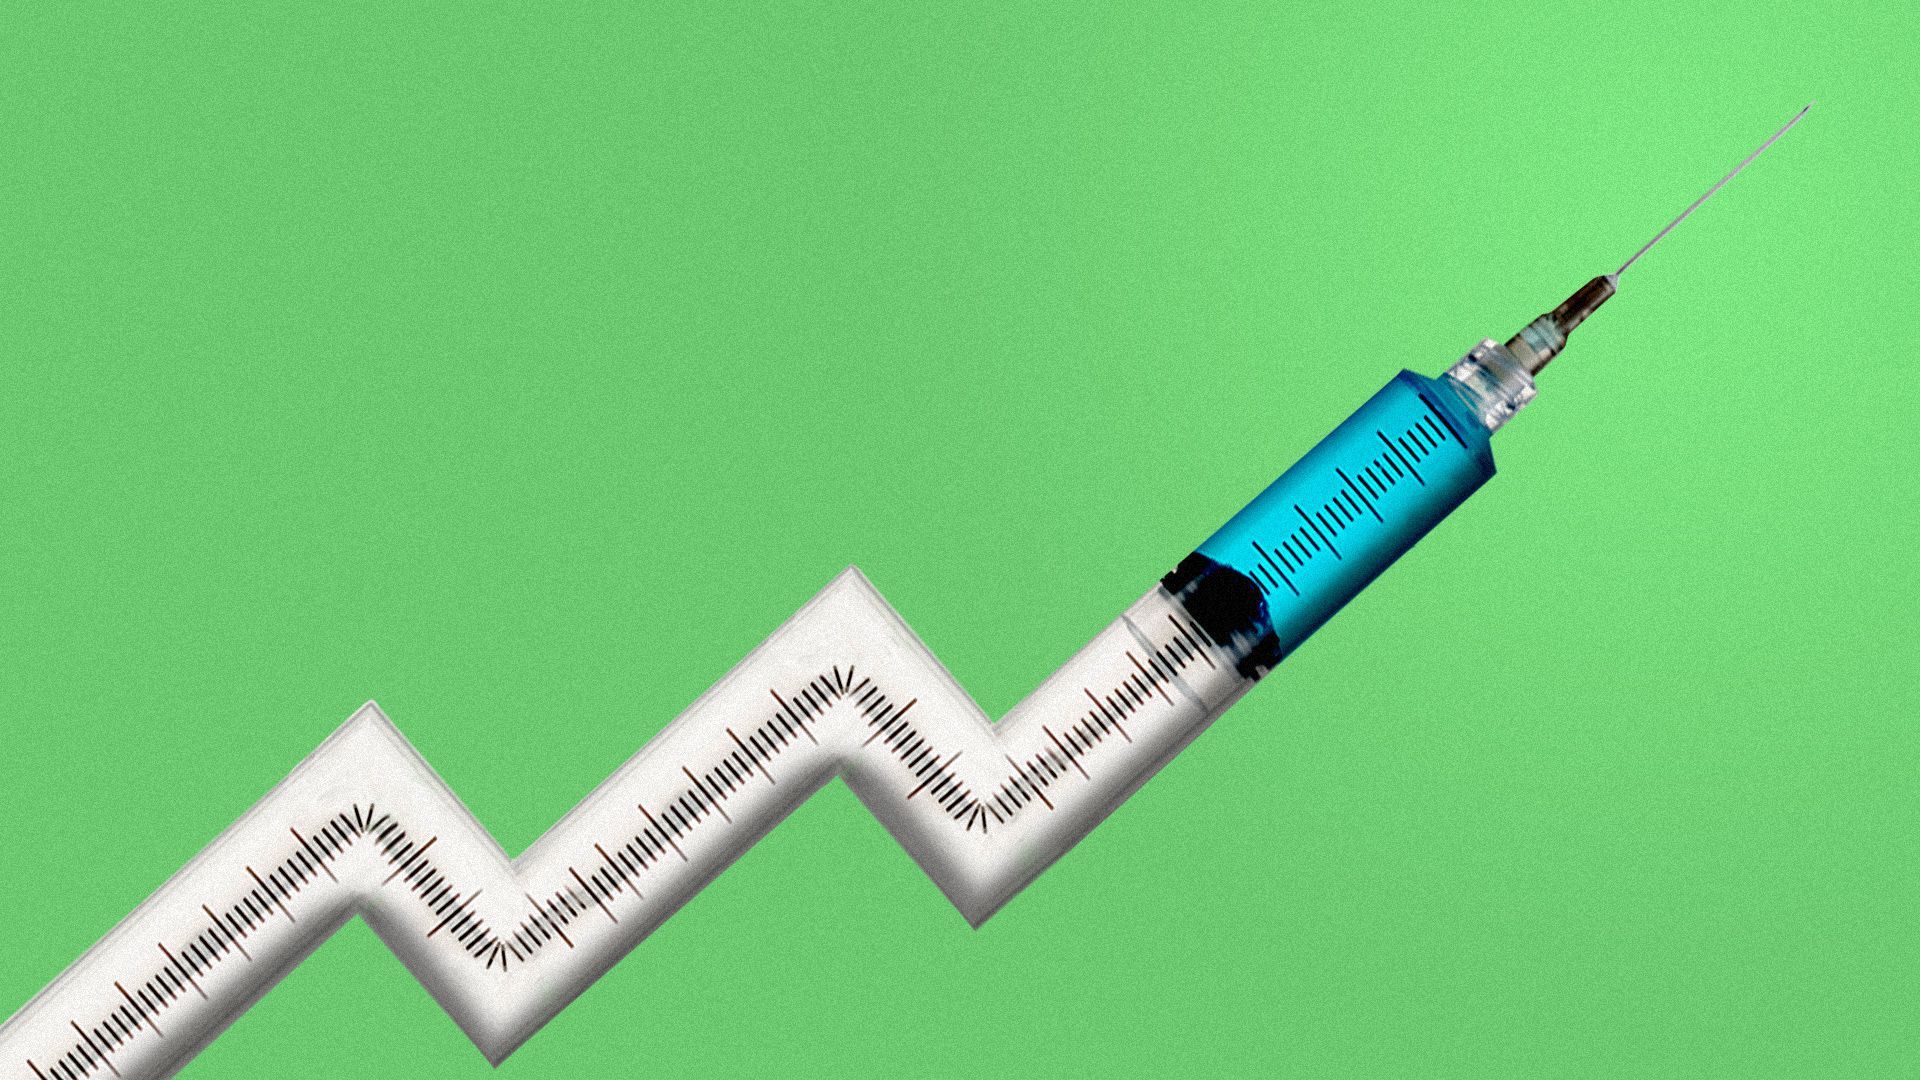 An illustration of a vaccine looking like an upwards line graph.